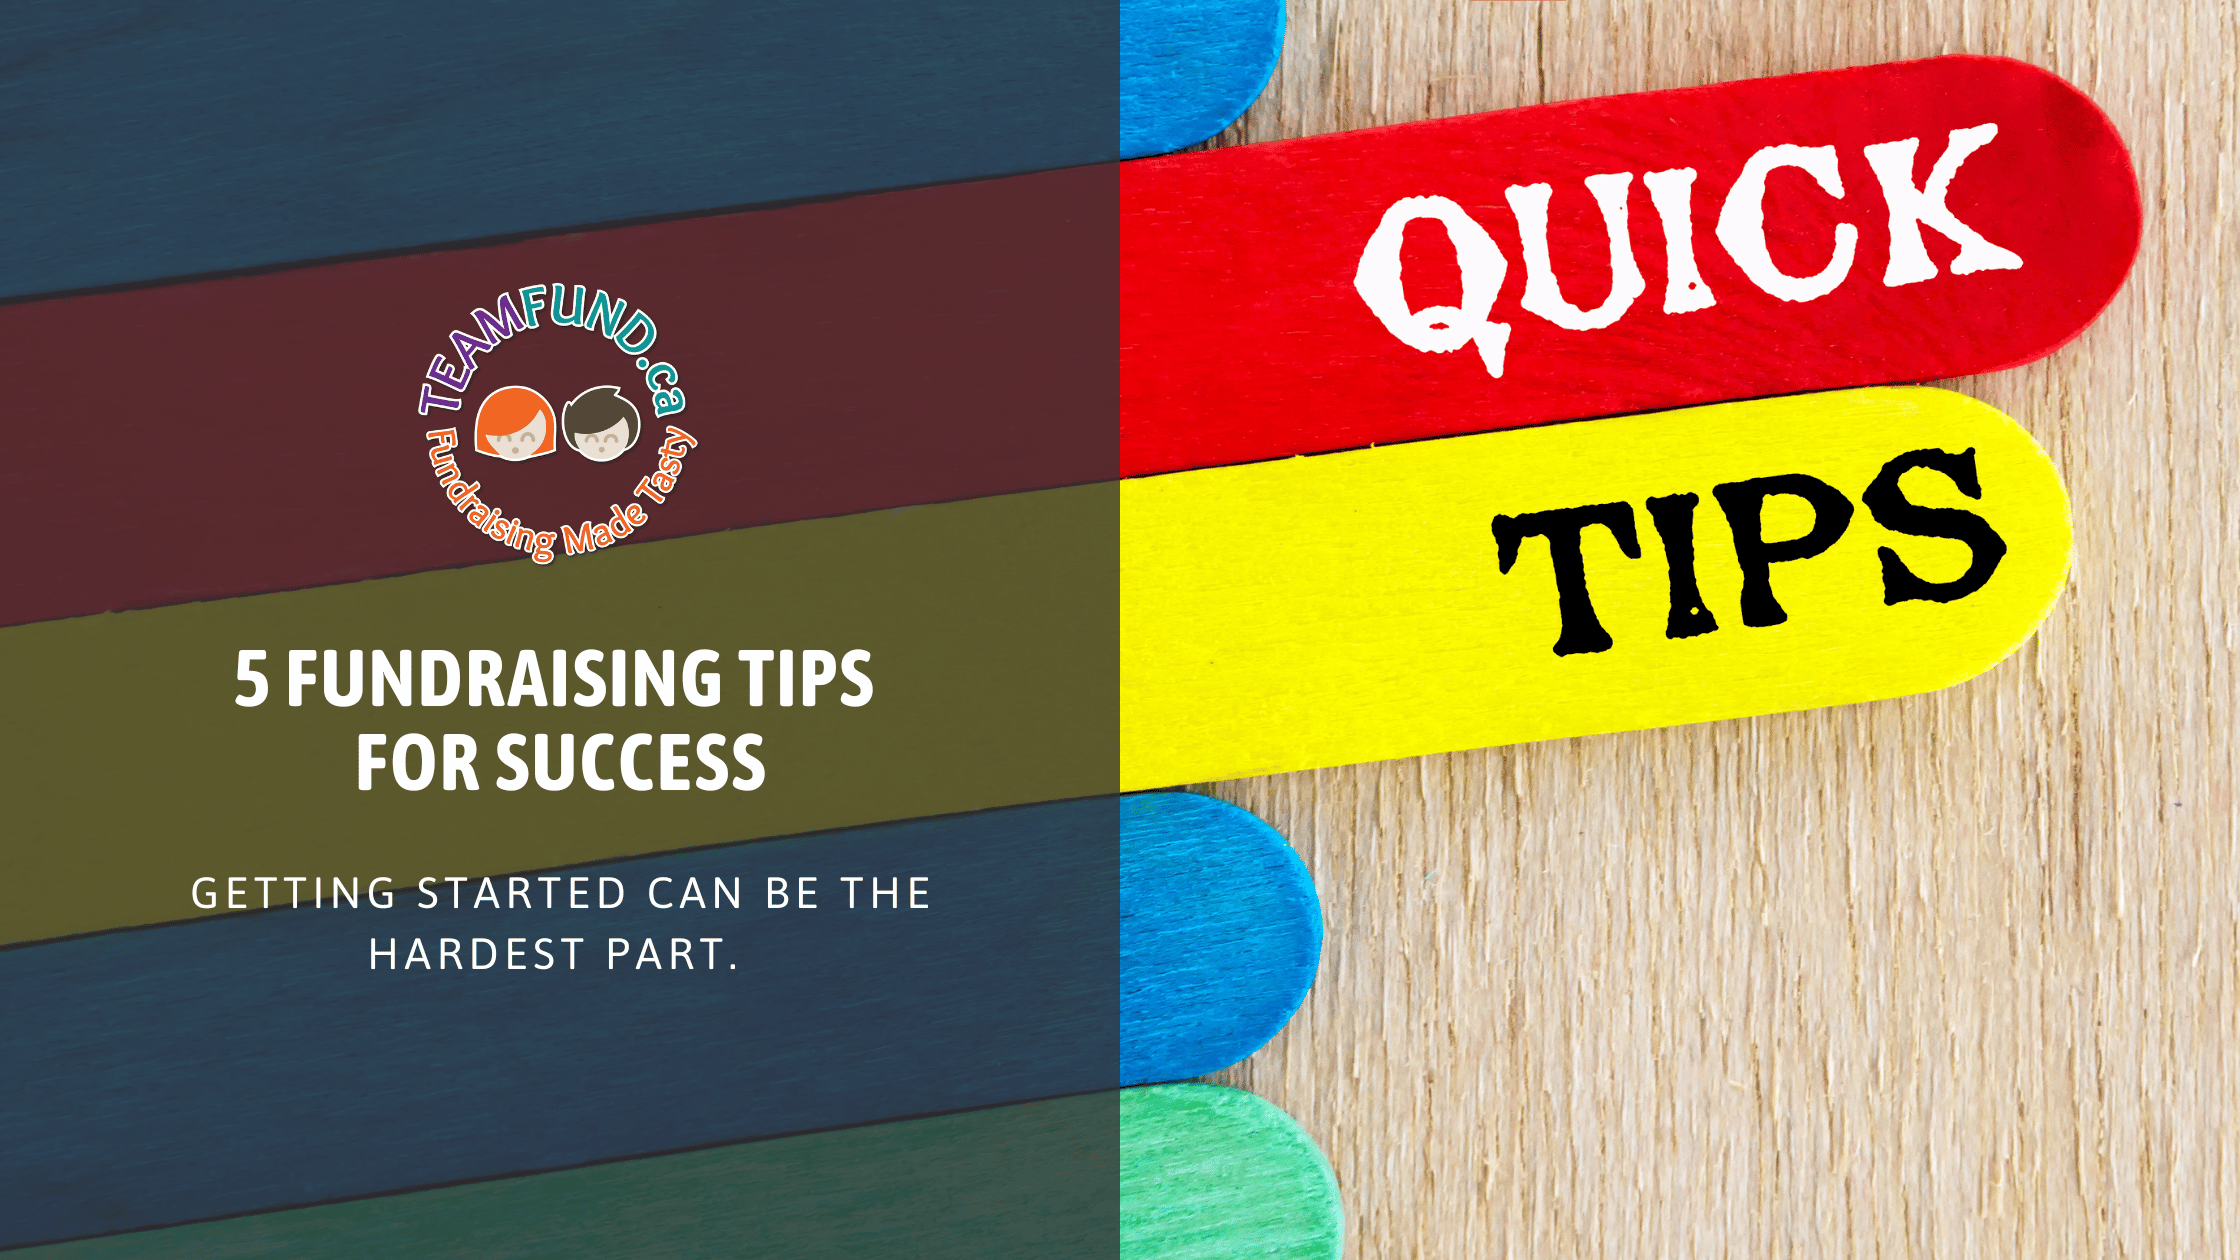 5 Fundraising Tips for a Successful Fundraiser